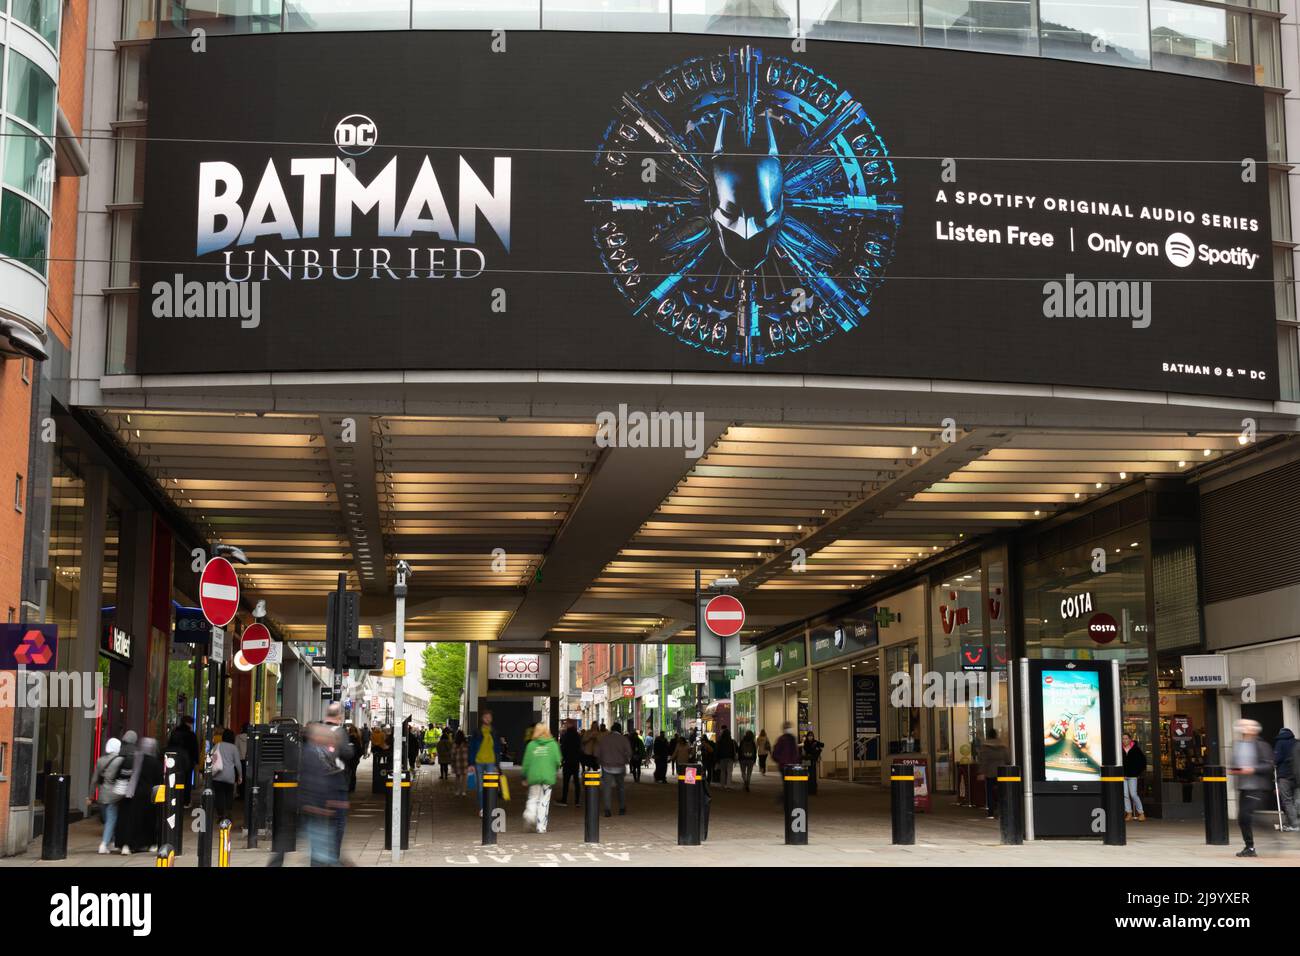 Advert for Batman unburied on Spotify. Display screen Manchester Arndale UK. Long exposure. Stock Photo